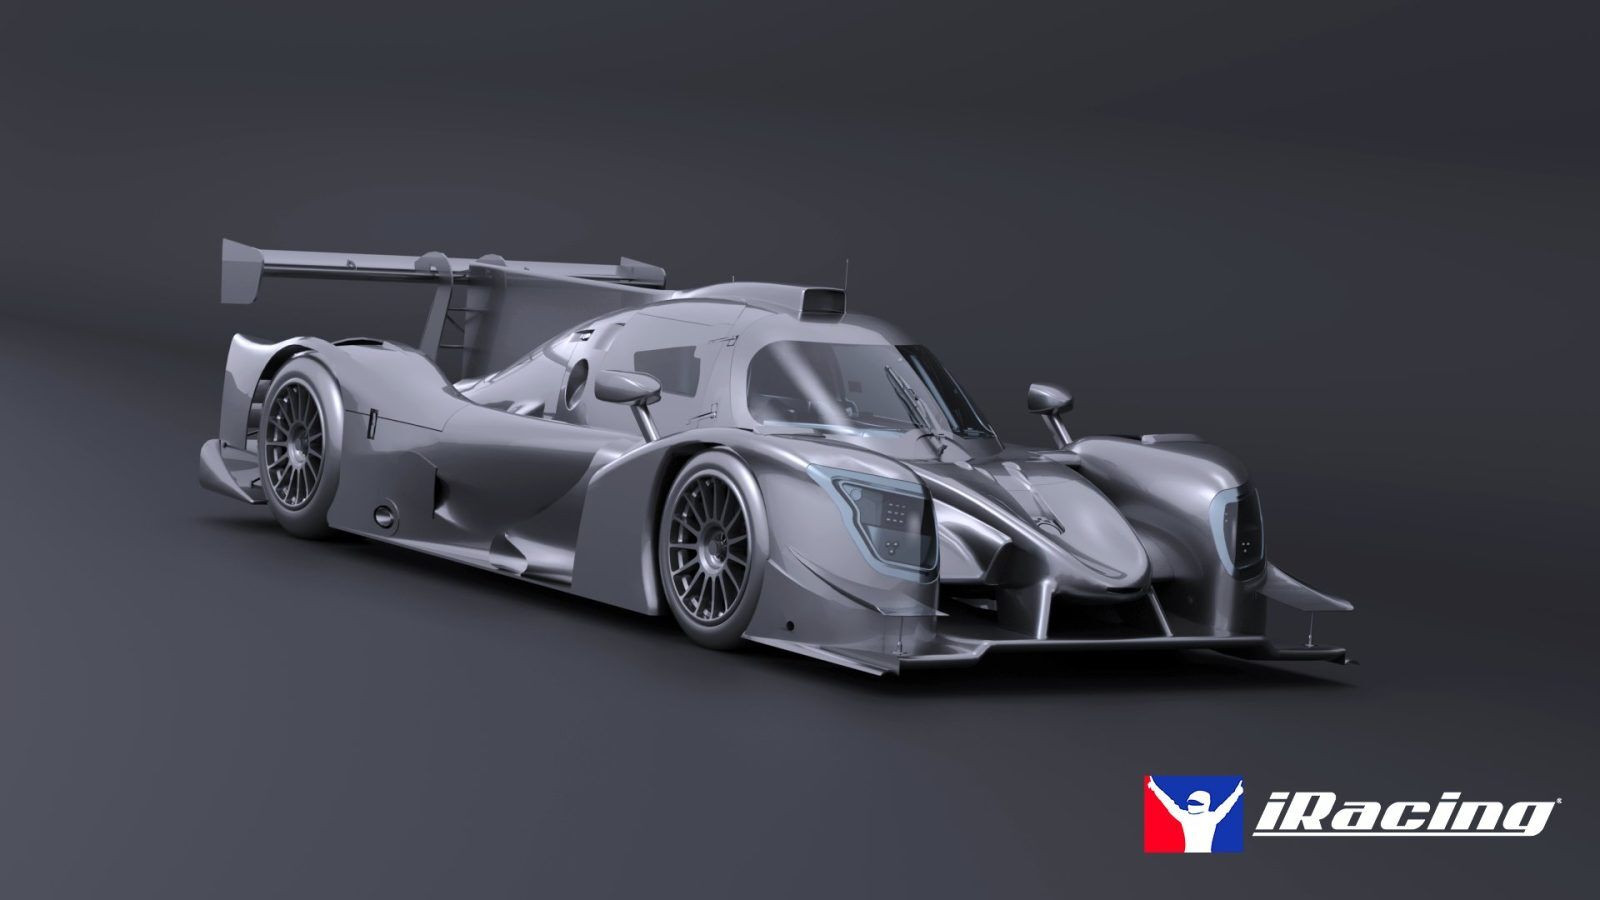 The Ligier JS P320 is coming to iRacing in the Season 3 update of 2023